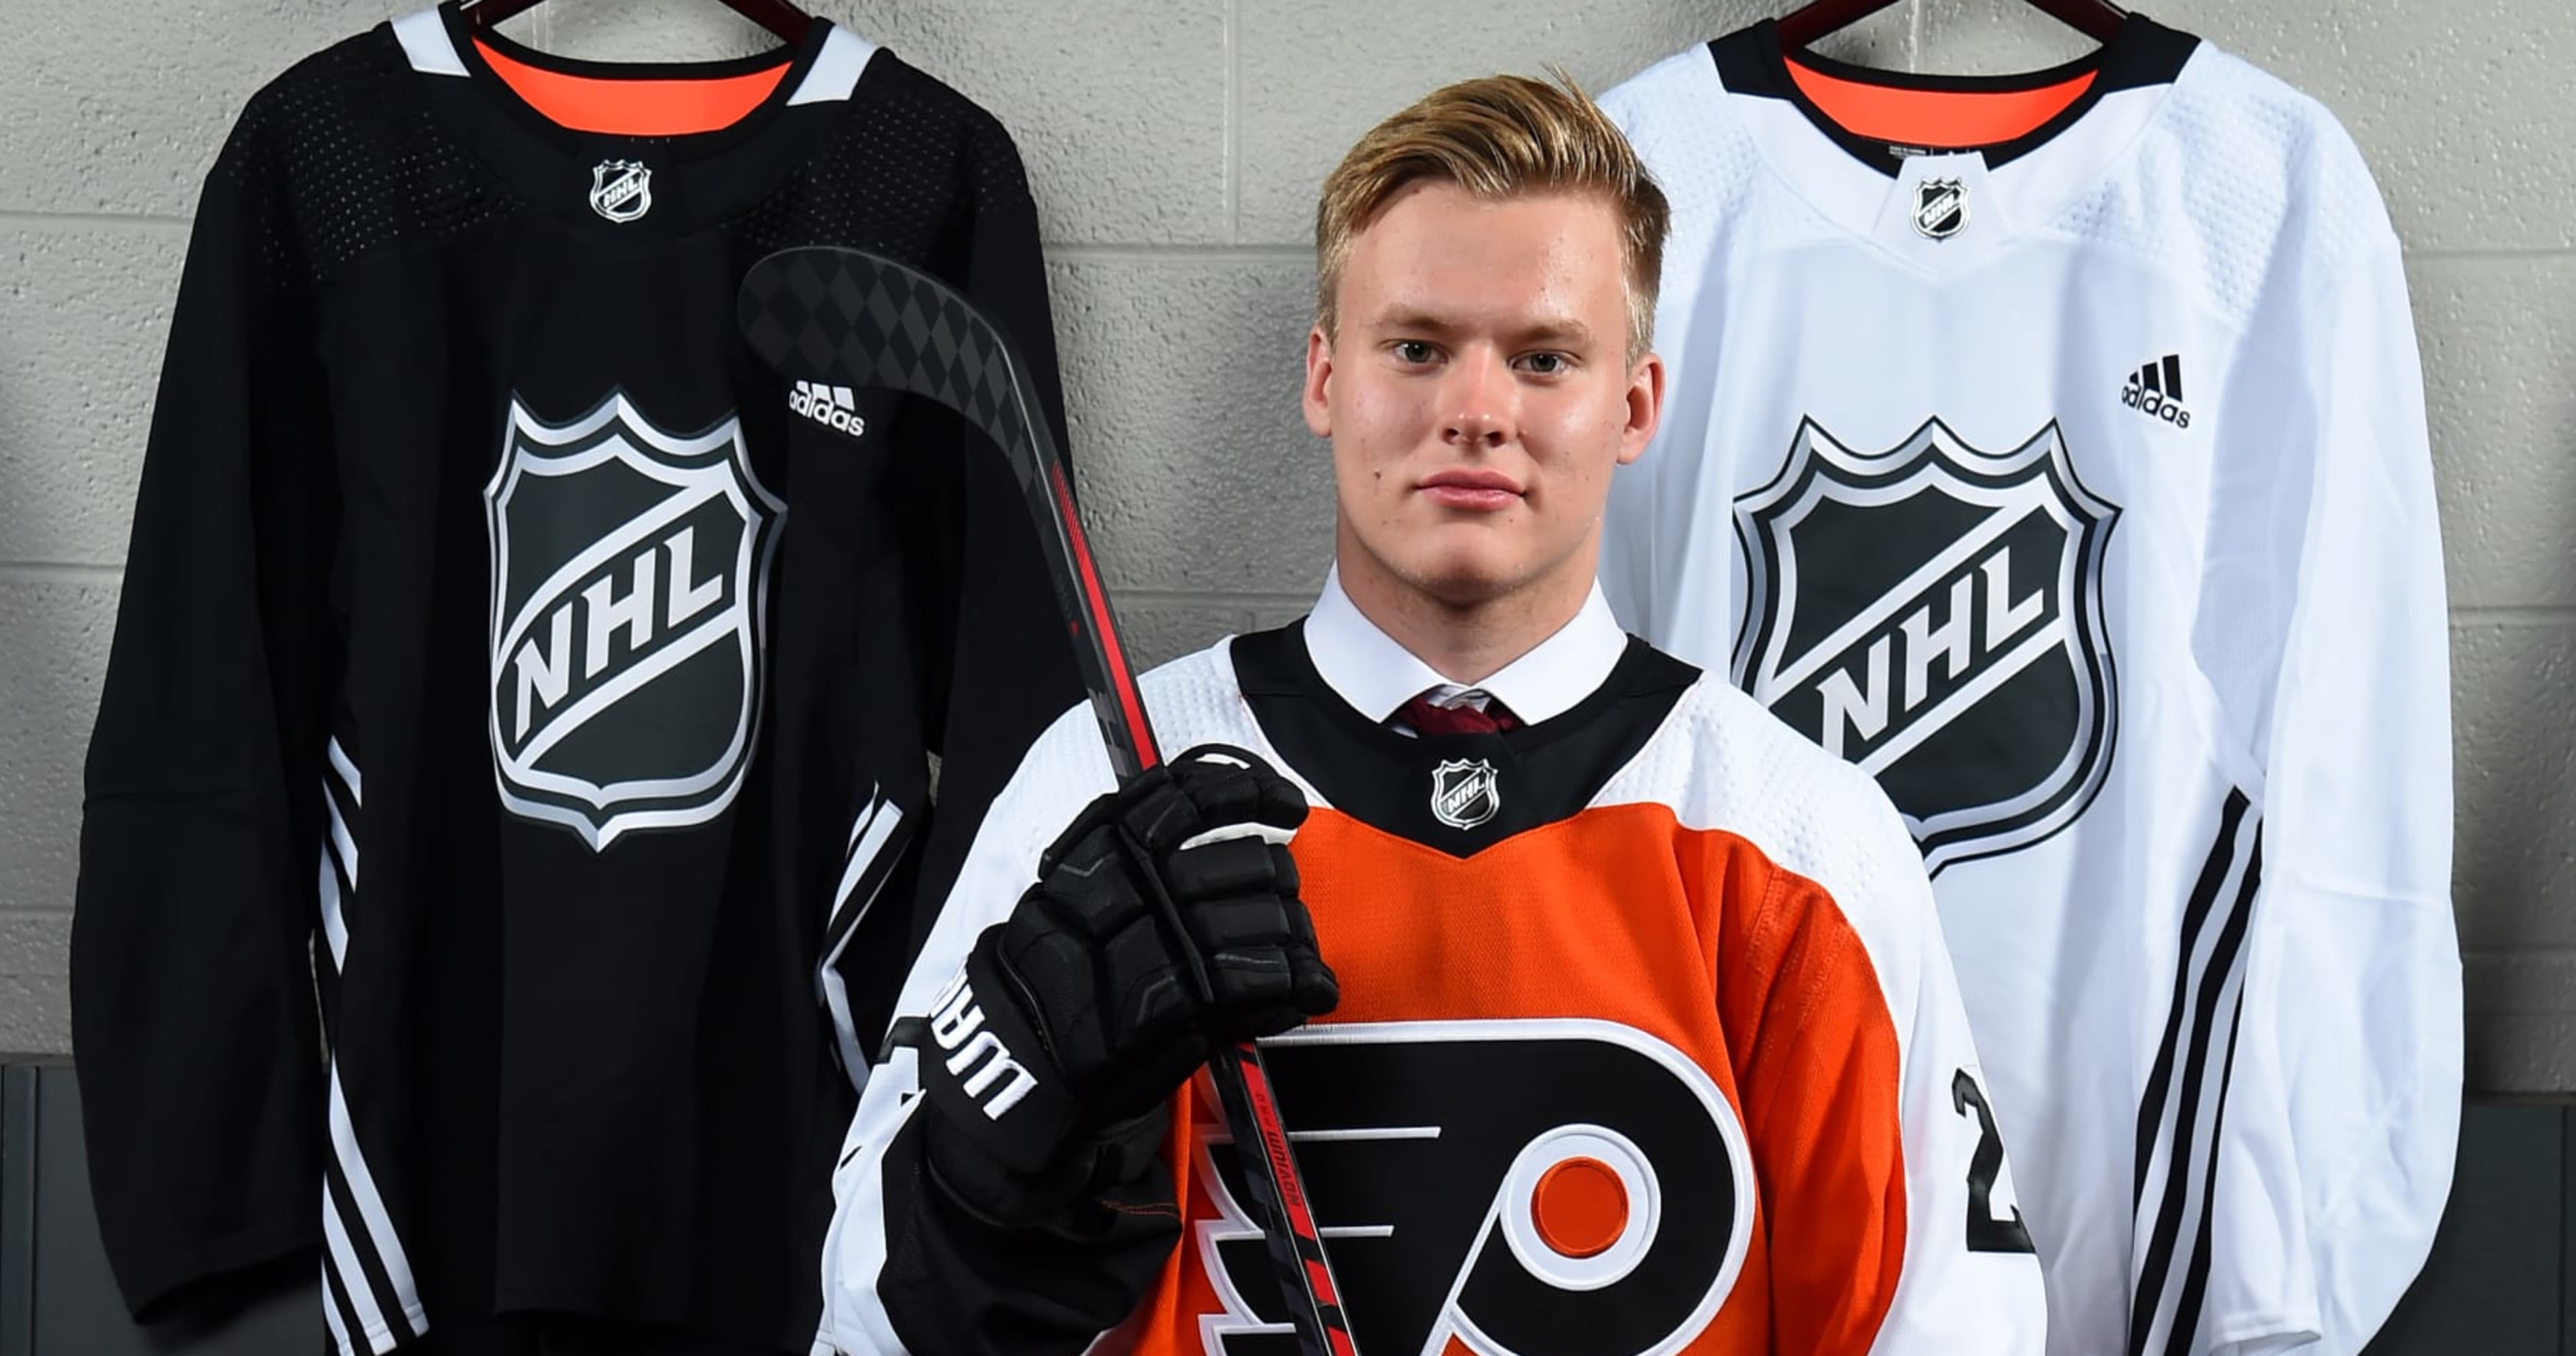 Ranking the 10 Best NHL Prospects That Will Make a Huge Impact in the Next 3 Years